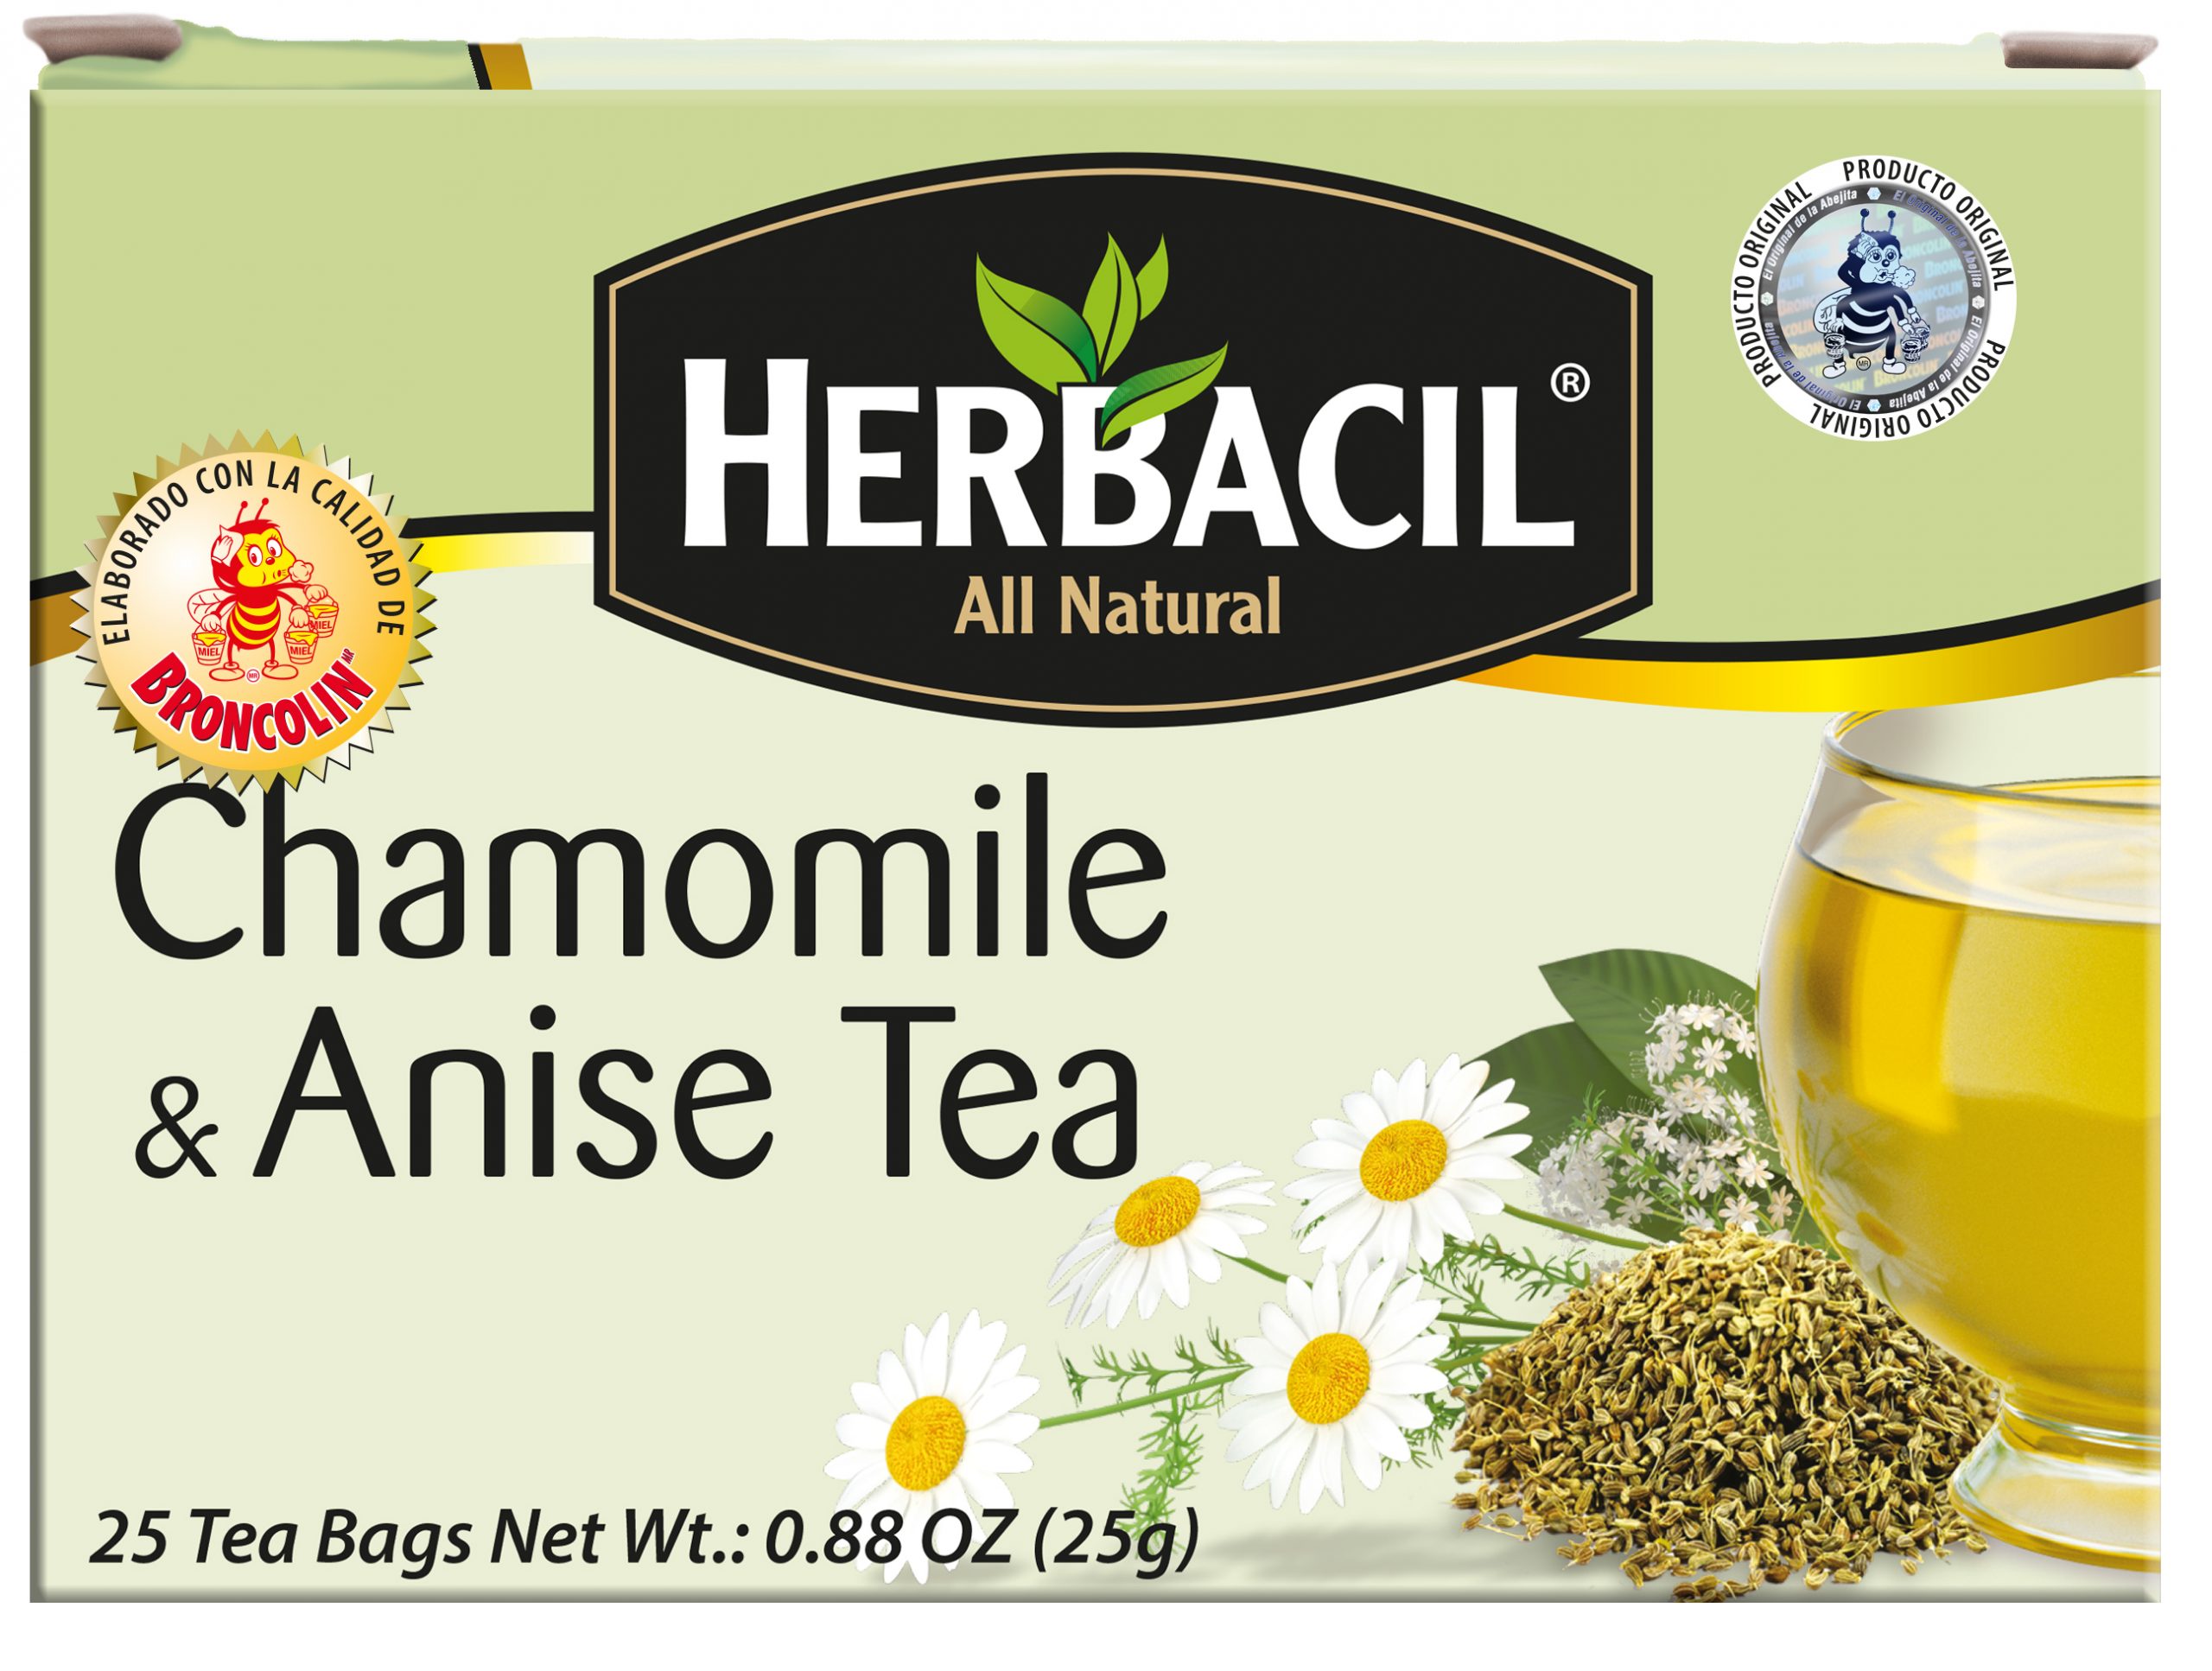 Chamomile with Anise ✓ Te de Manzanilla con Anis 25 bags by Therbal